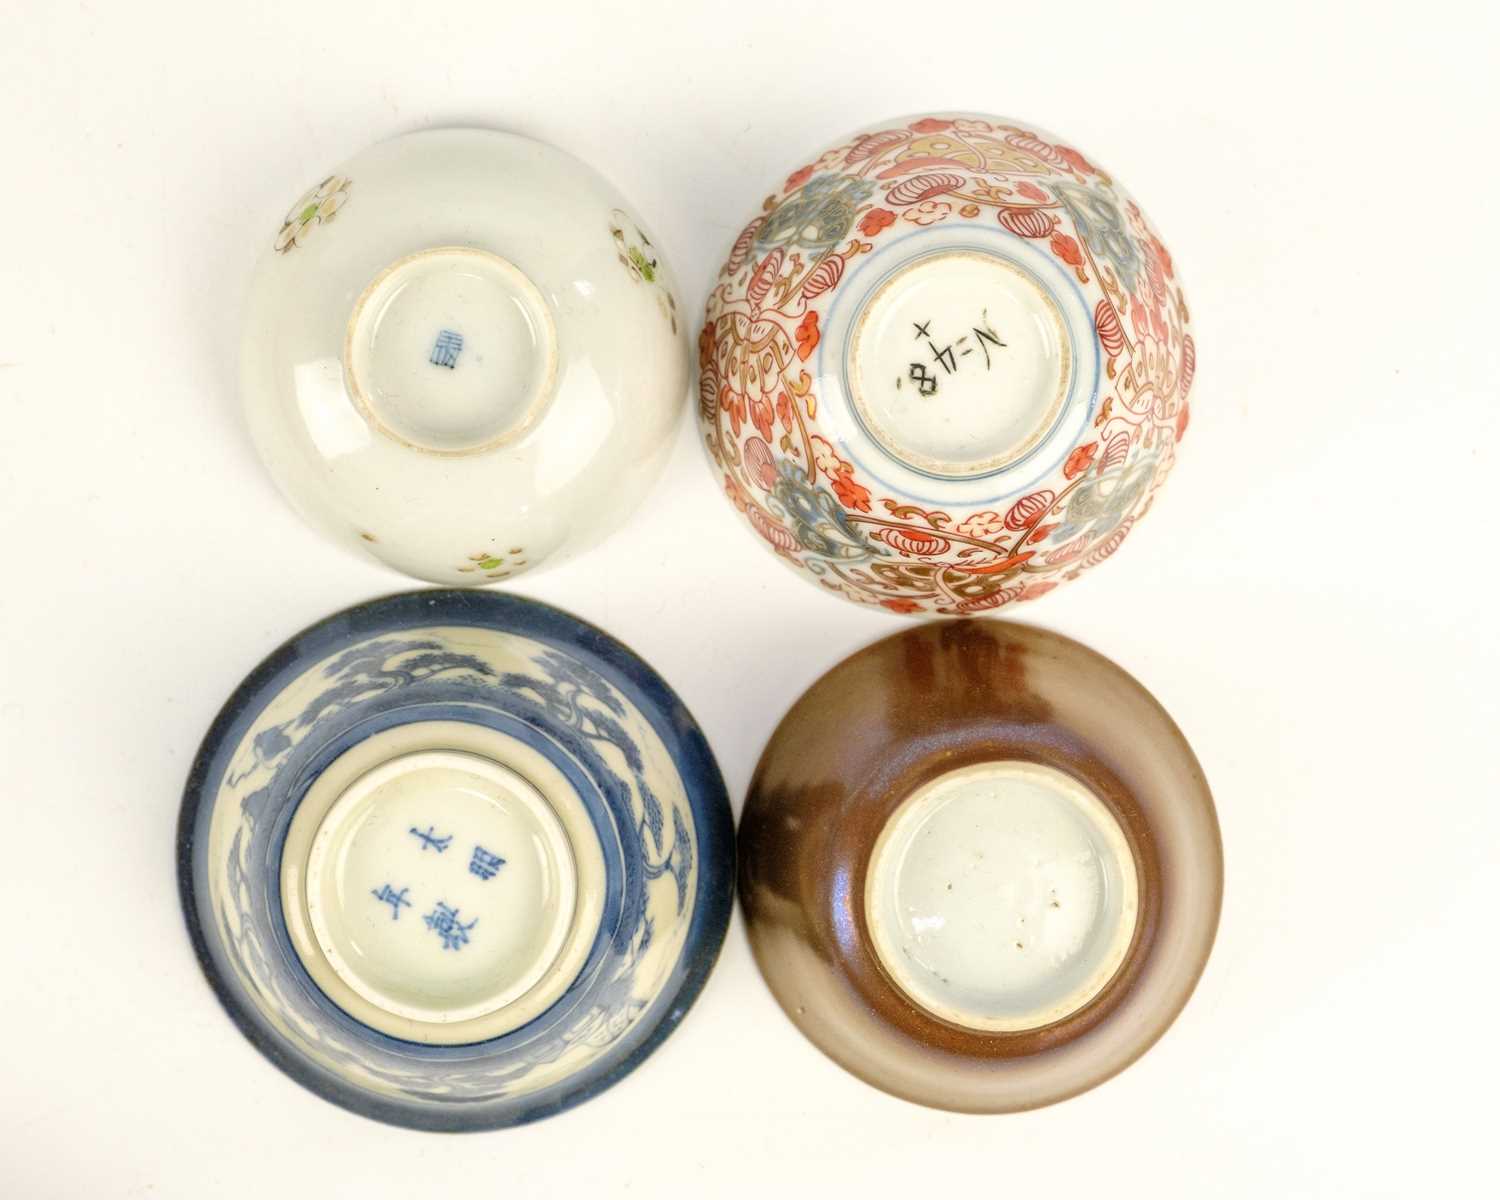 Five Chinese porcelain tea bowls and saucers, 18th century. - Image 11 of 18